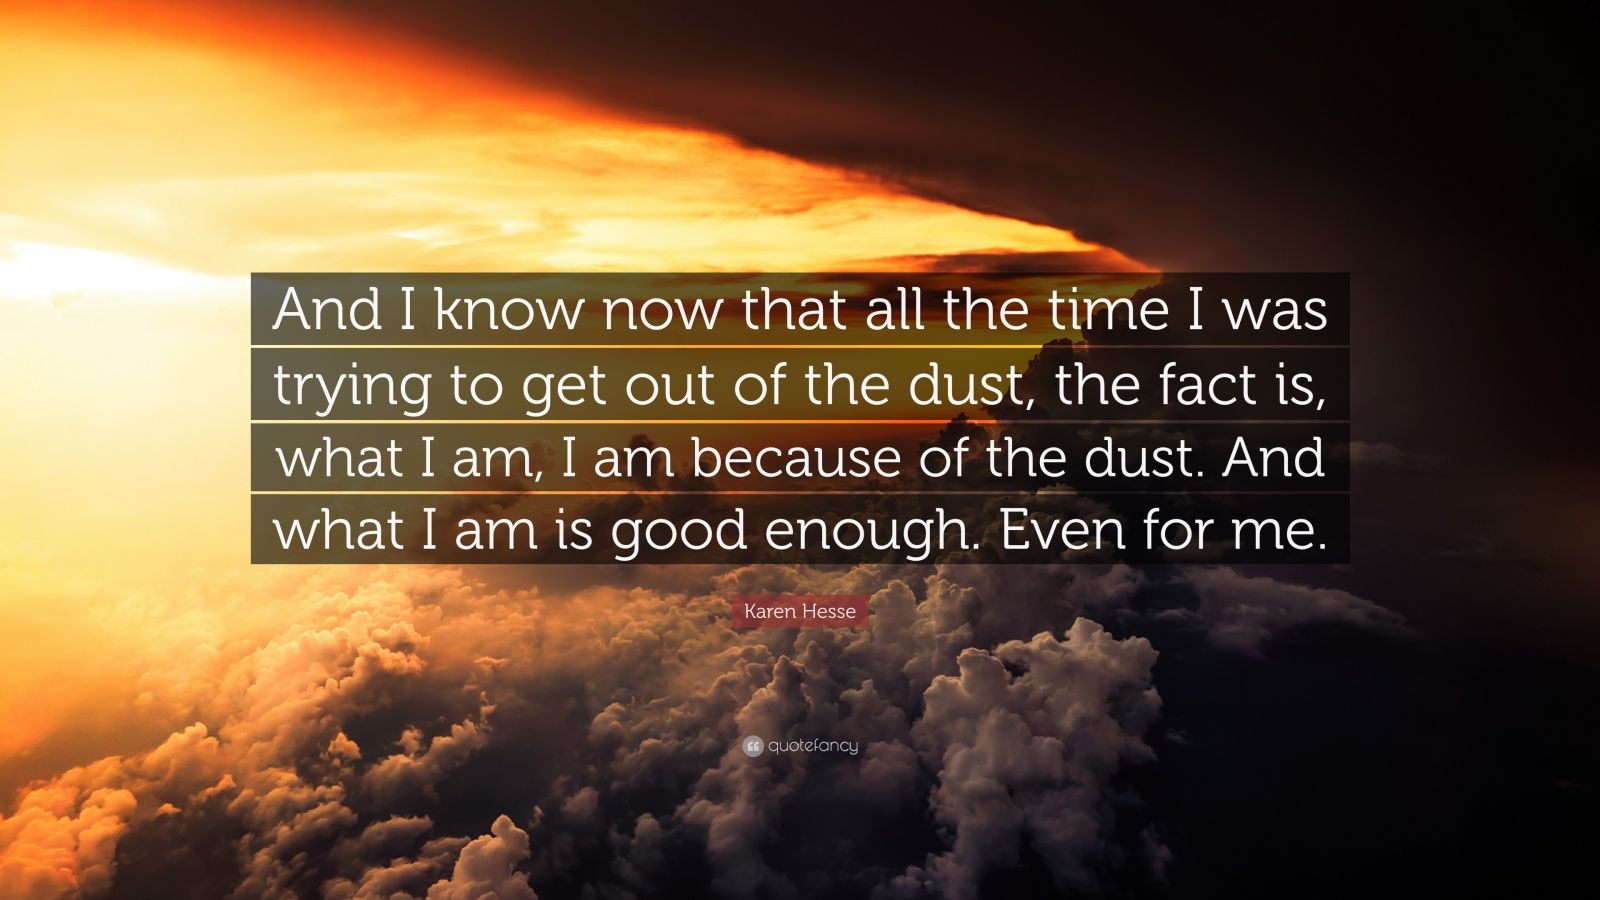 Karen Hesse Quote: “And I know now that all the time I was trying to get  out of the dust, the fact is, what I am, I am because of the dust. ”